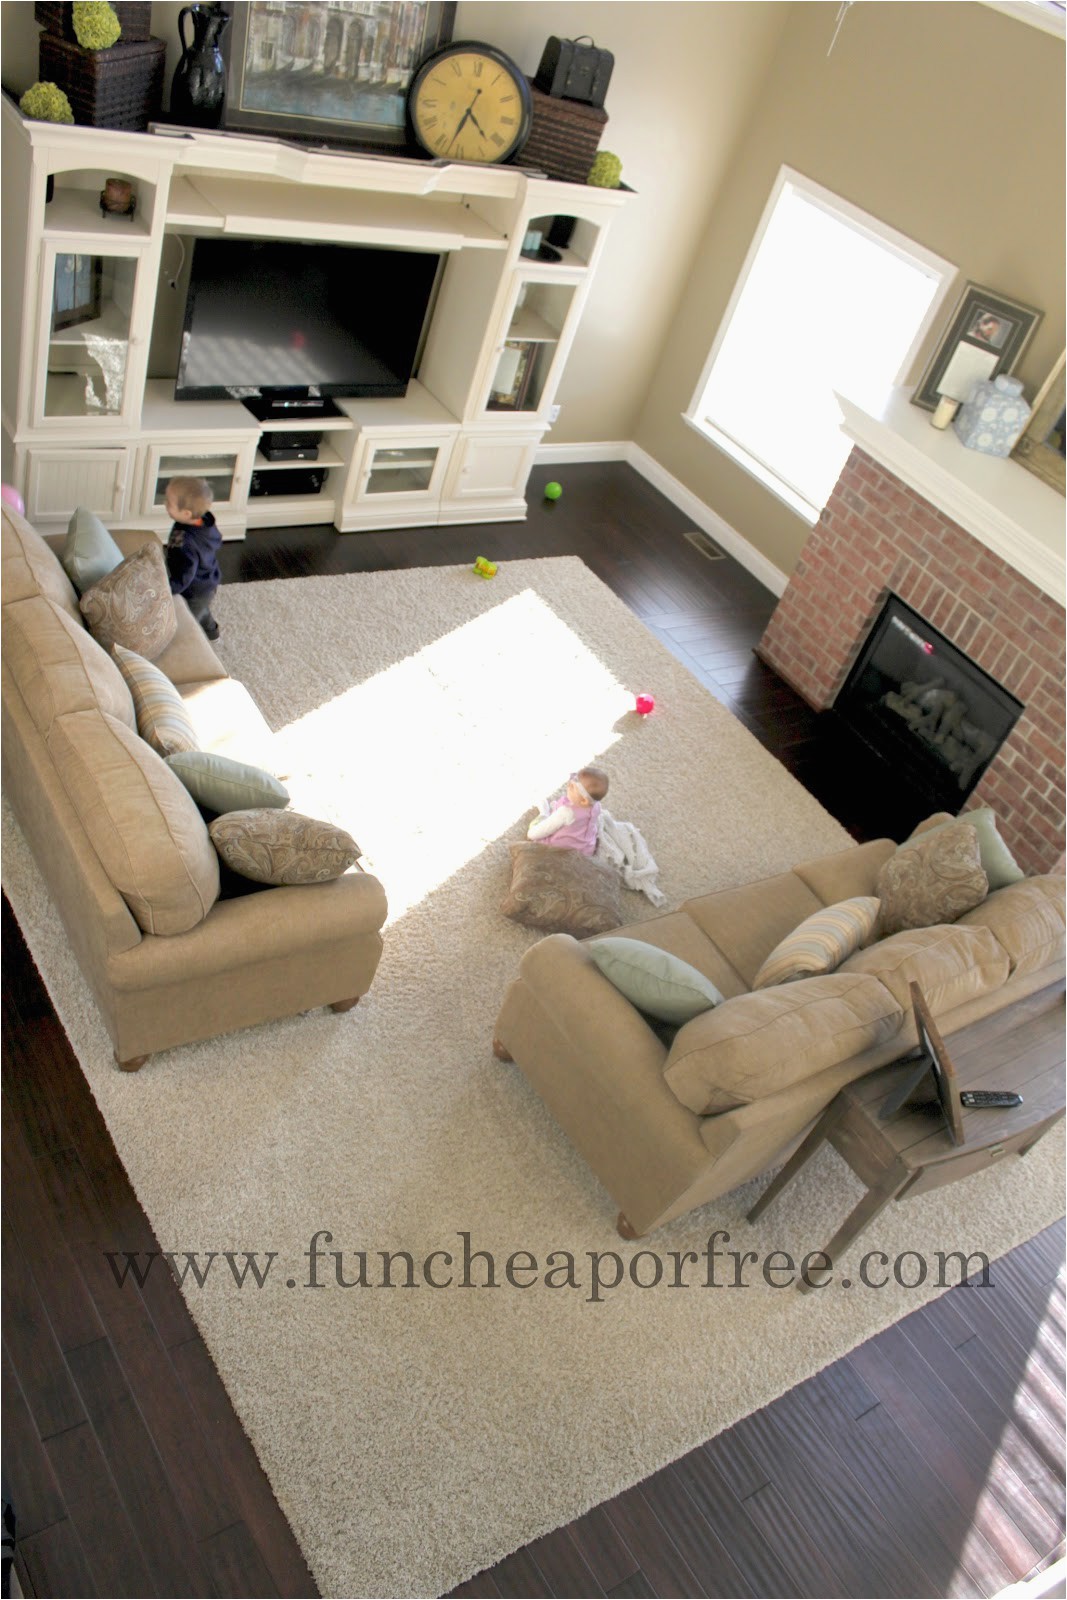 Make Carpet Into area Rug How to Make An area Rug Out Of Remnant Carpet Fun Cheap or